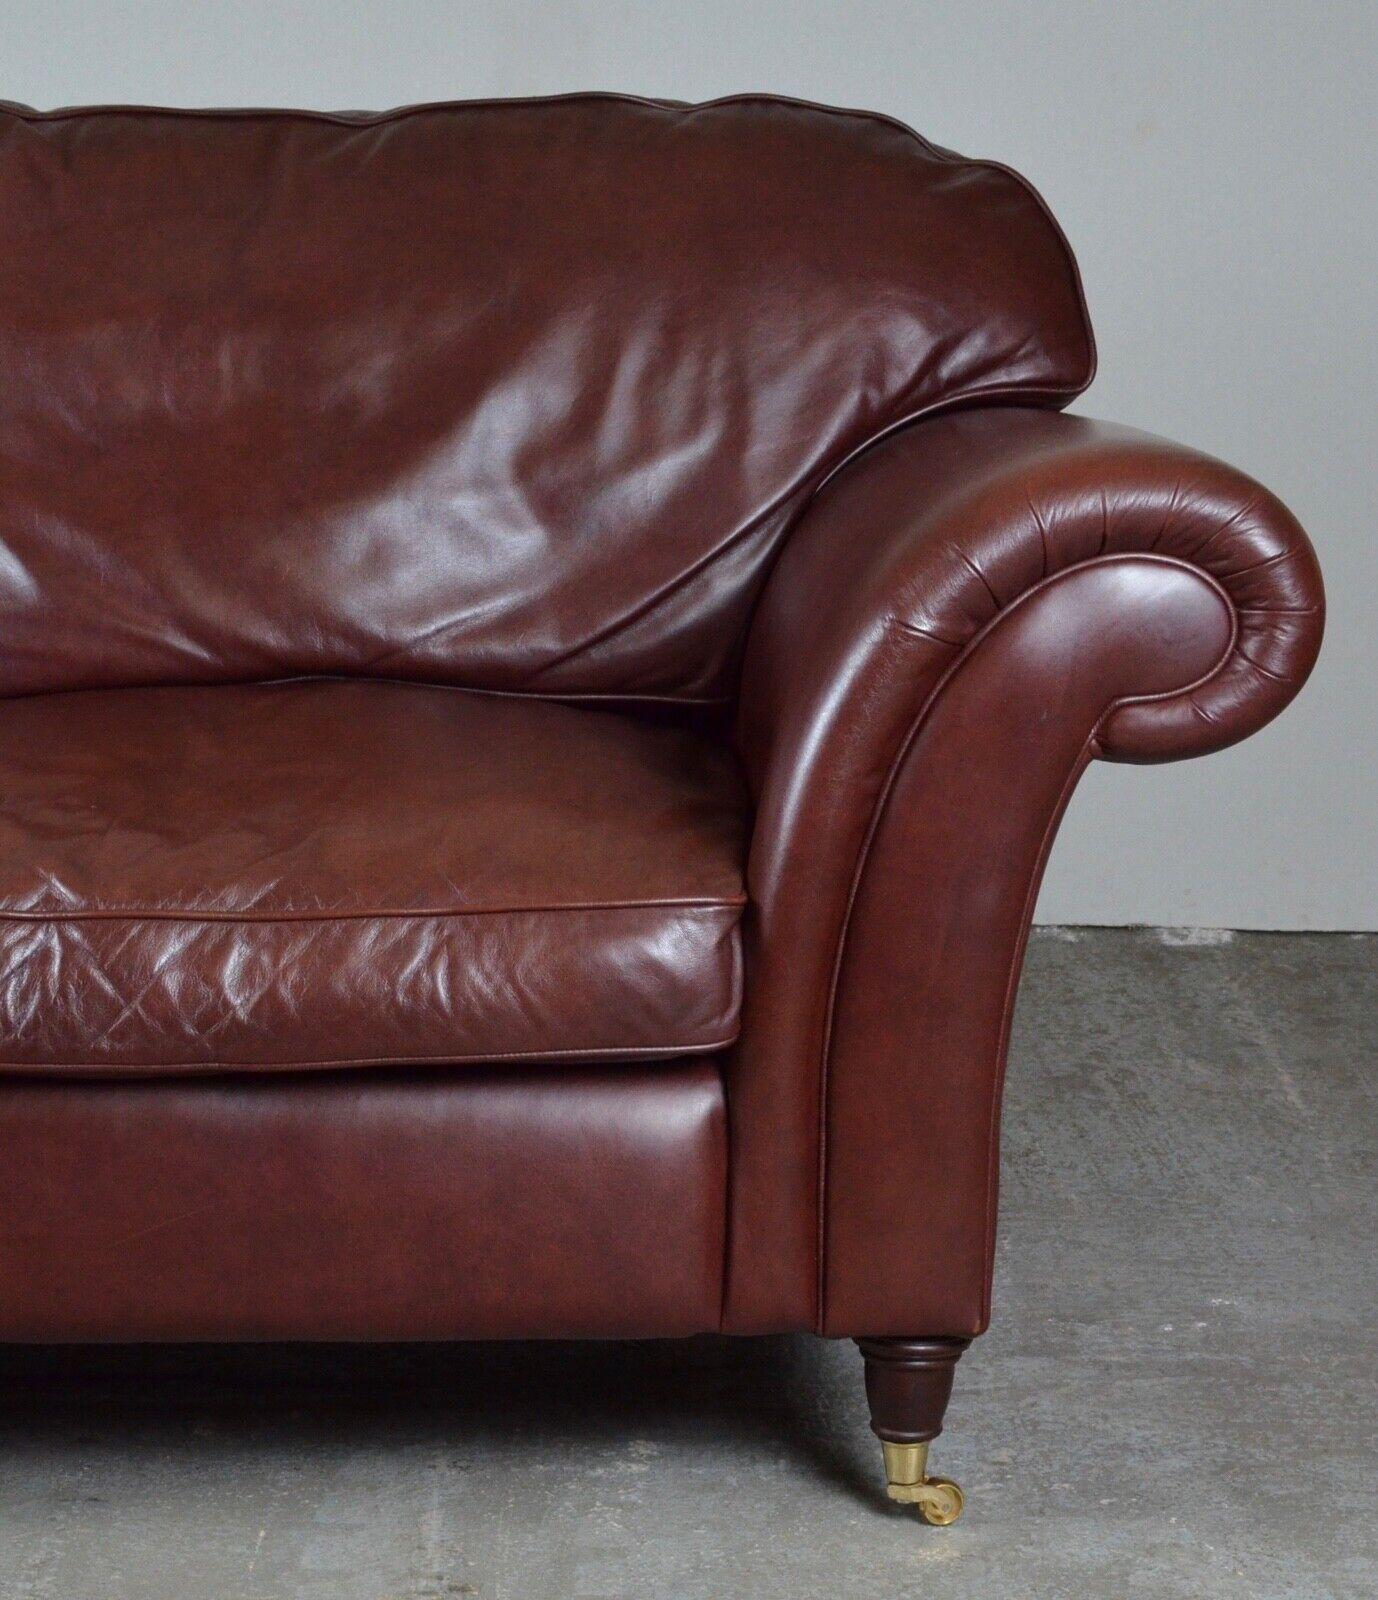 English Luxury 3 Seater Heritage Brown Leather Laura Ashley Mortimer Sofa with Castors For Sale